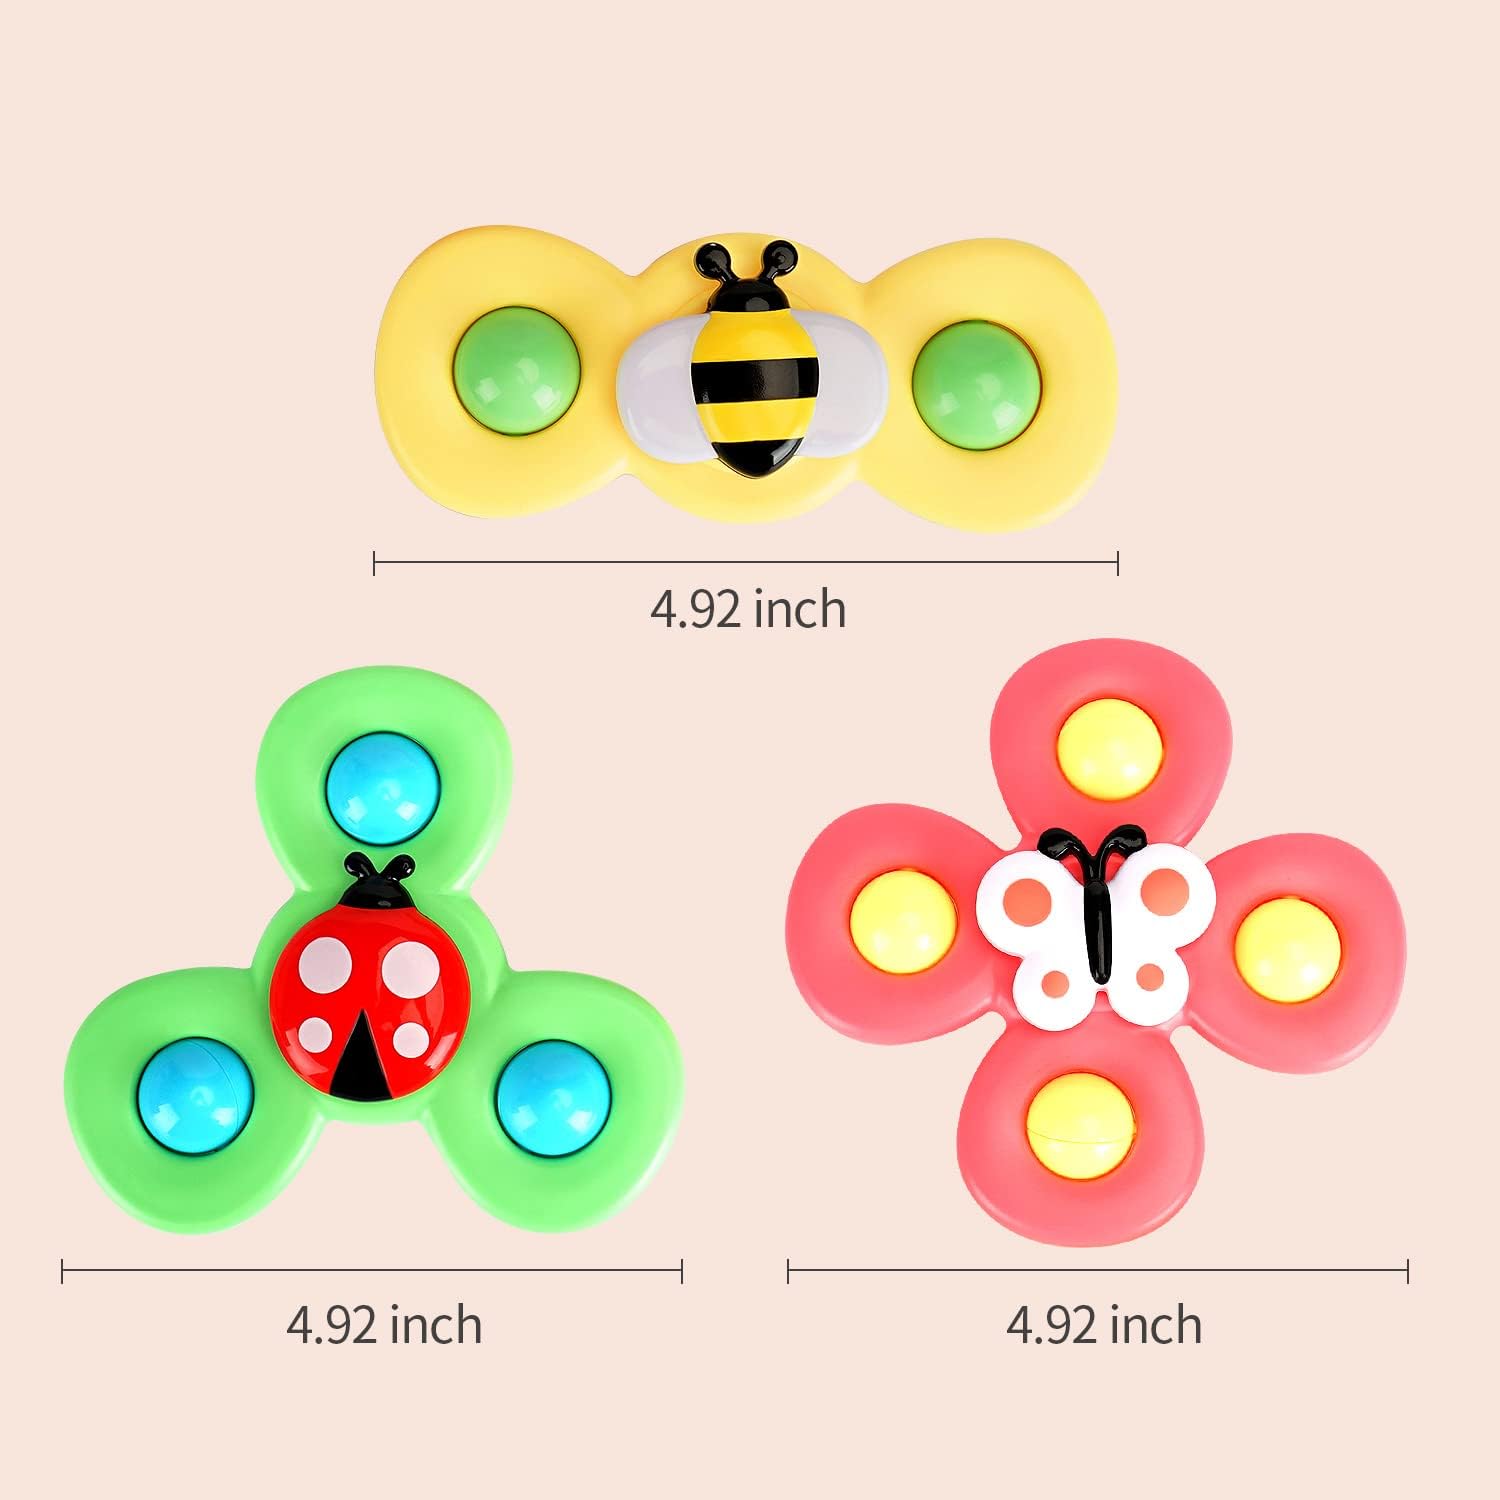 3PCS ALASOU Suction Cup Spinner Toys for Baby Christmas Stocking Stuffers Gifts|Novelty Spinning Tops Bath Toys for Kids Ages 1-3|Sensory Toys for Toddlers 1-3 Year Old Boy Birthday Gift